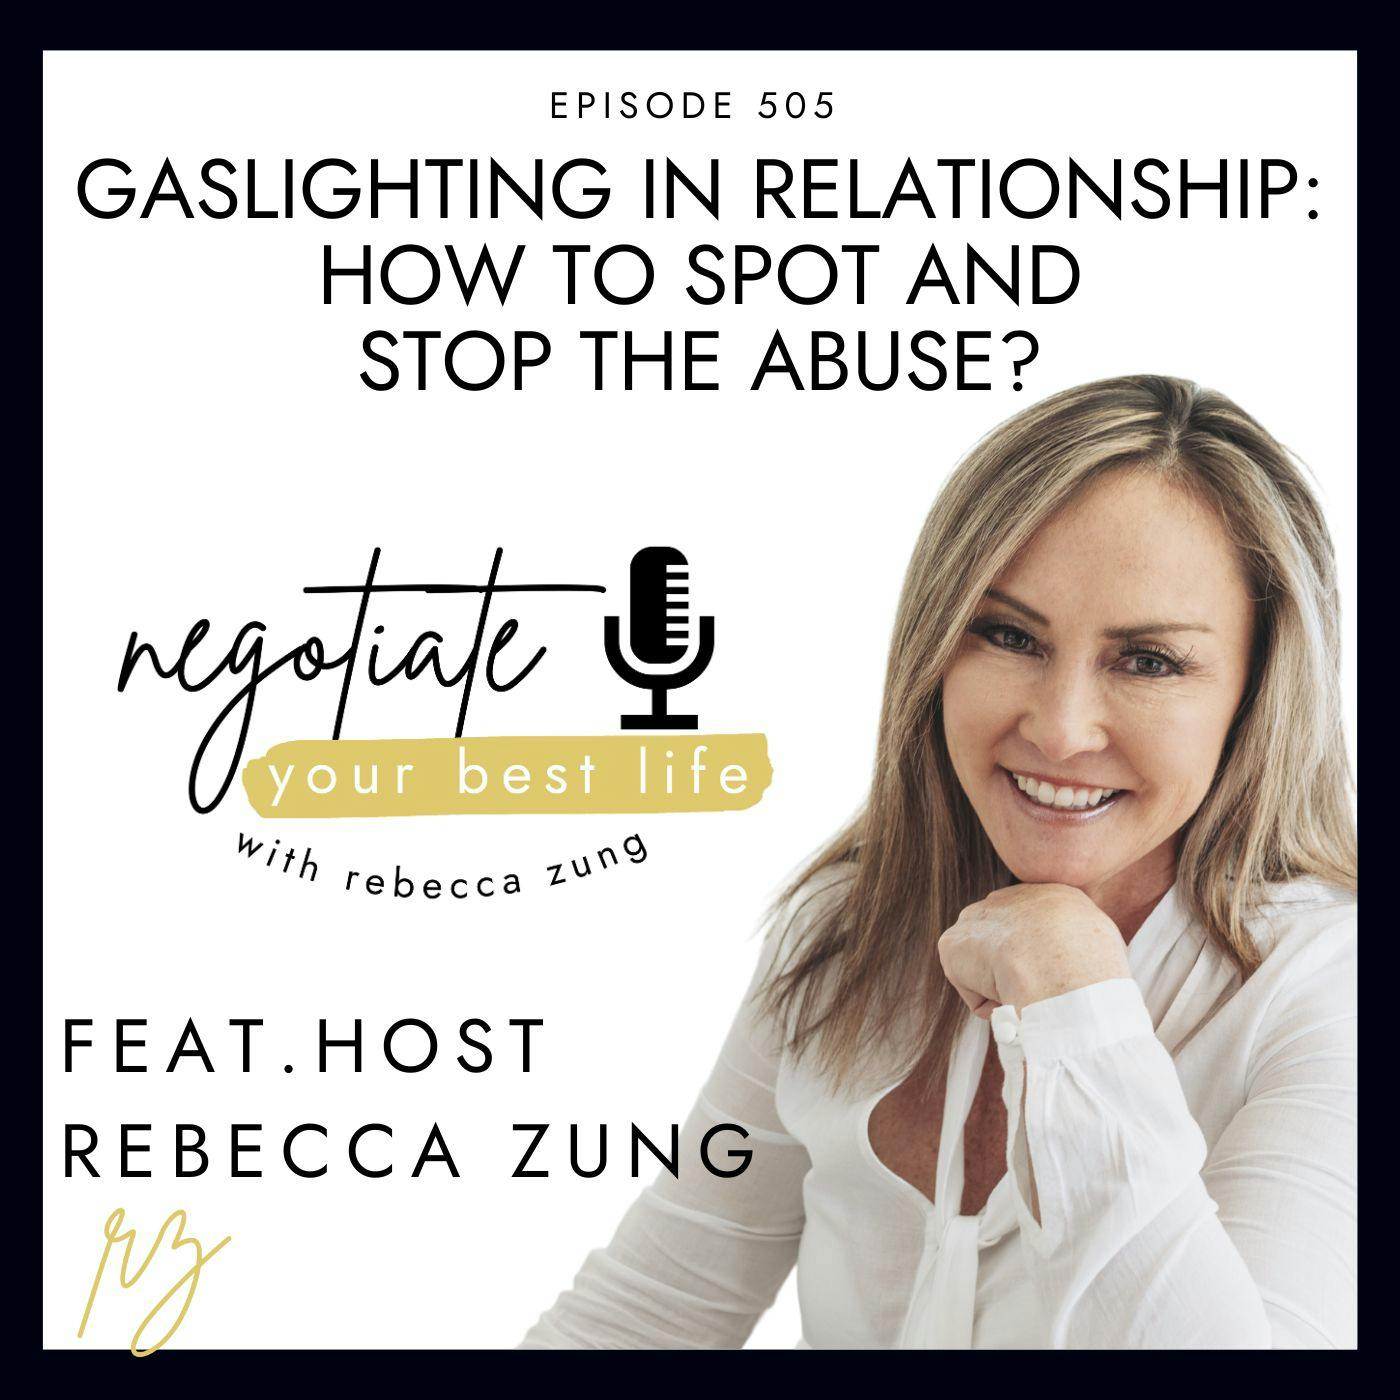 Gaslighting in Relationship: How to Spot and Stop the Abuse? with Rebecca Zung on Negotiate Your Best Life #505